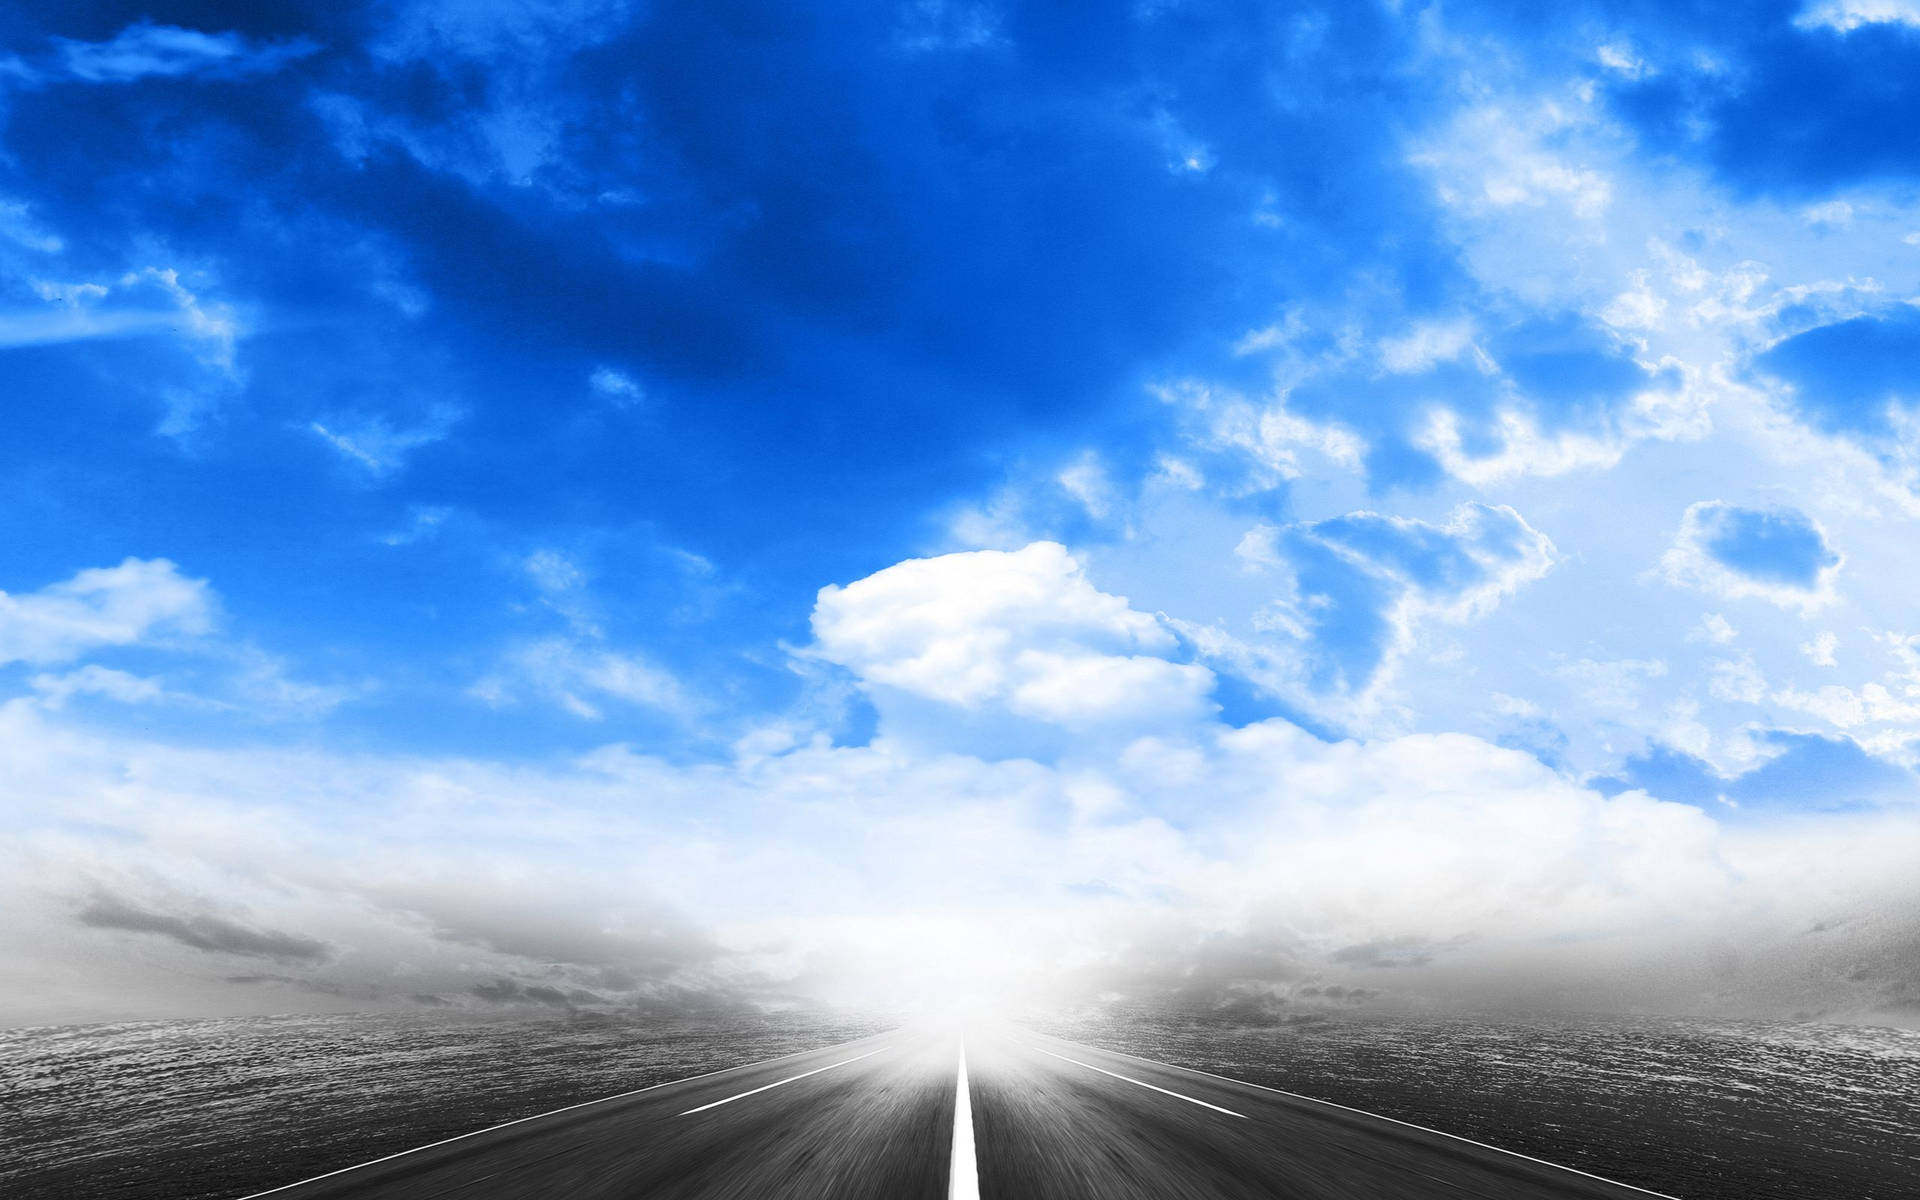 A Road With Clouds In The Sky Background